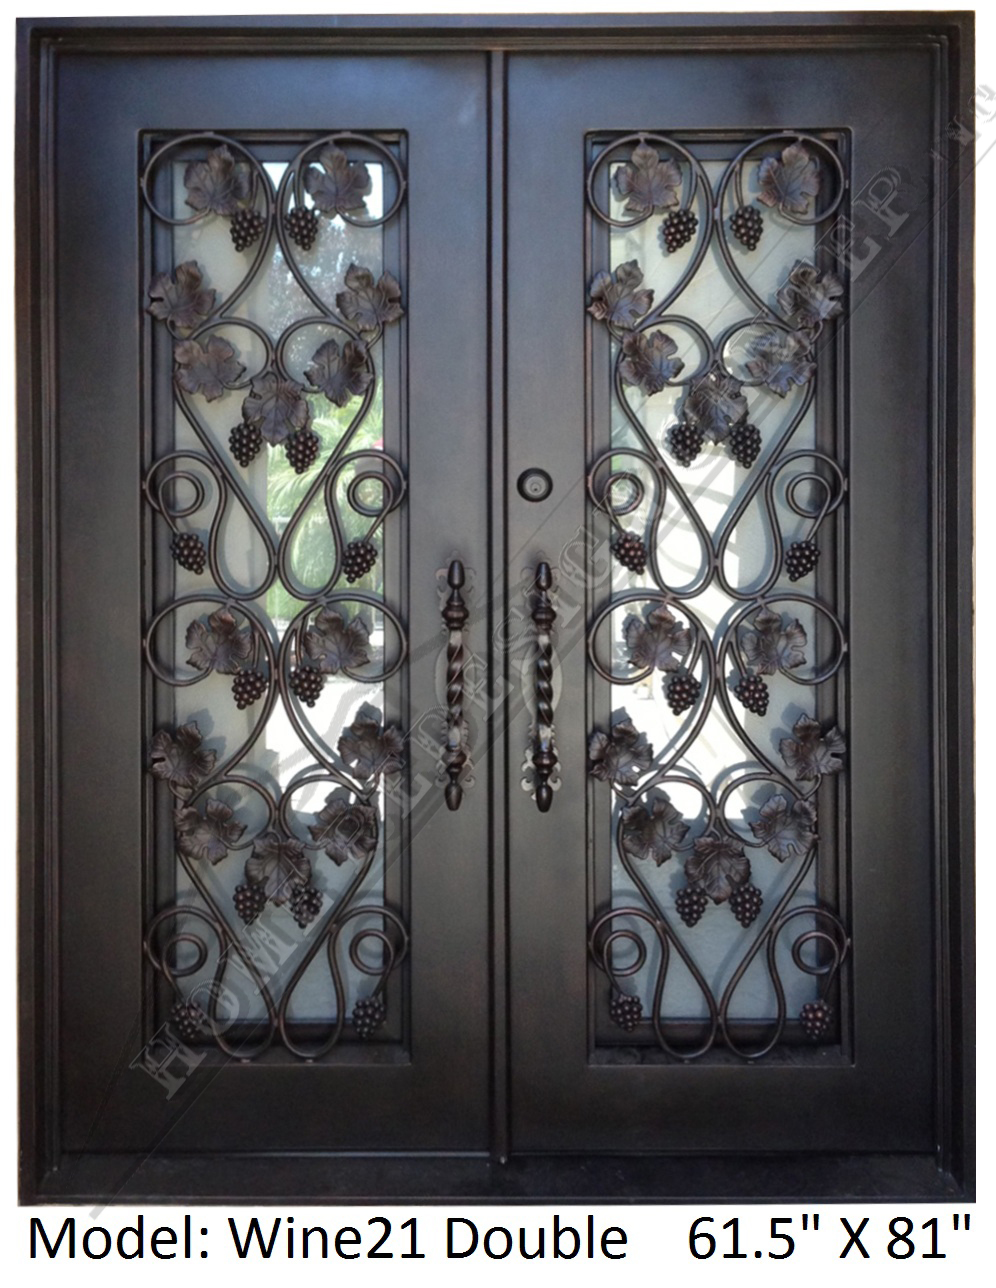 Wrought Iron Entry Doors Doors With Iron Works Ornamental Iron